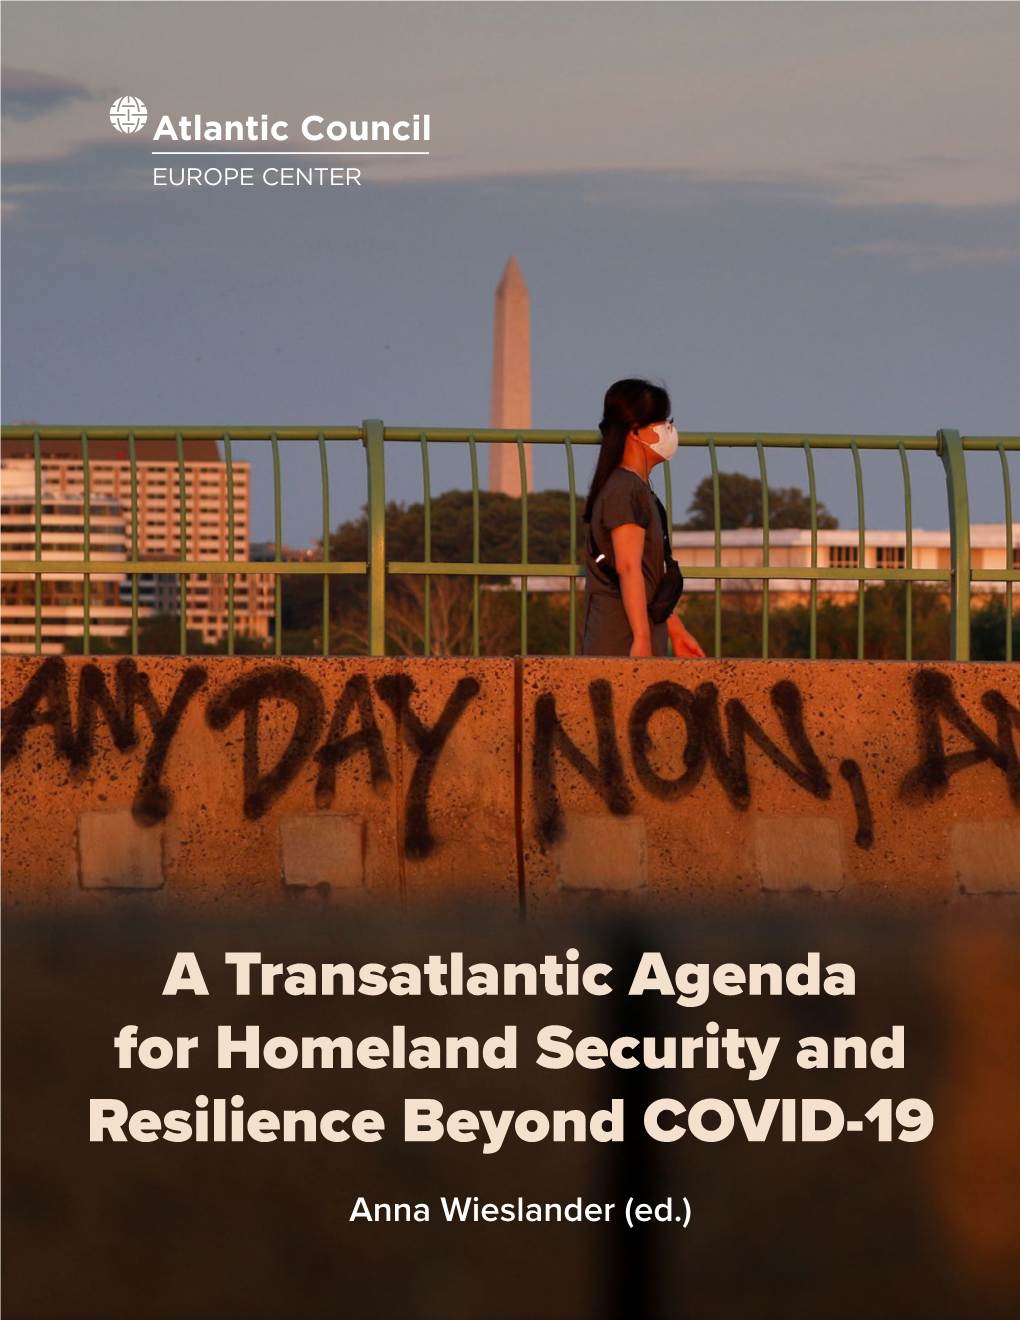 A Transatlantic Agenda for Homeland Security and Resilience Beyond Covid-19